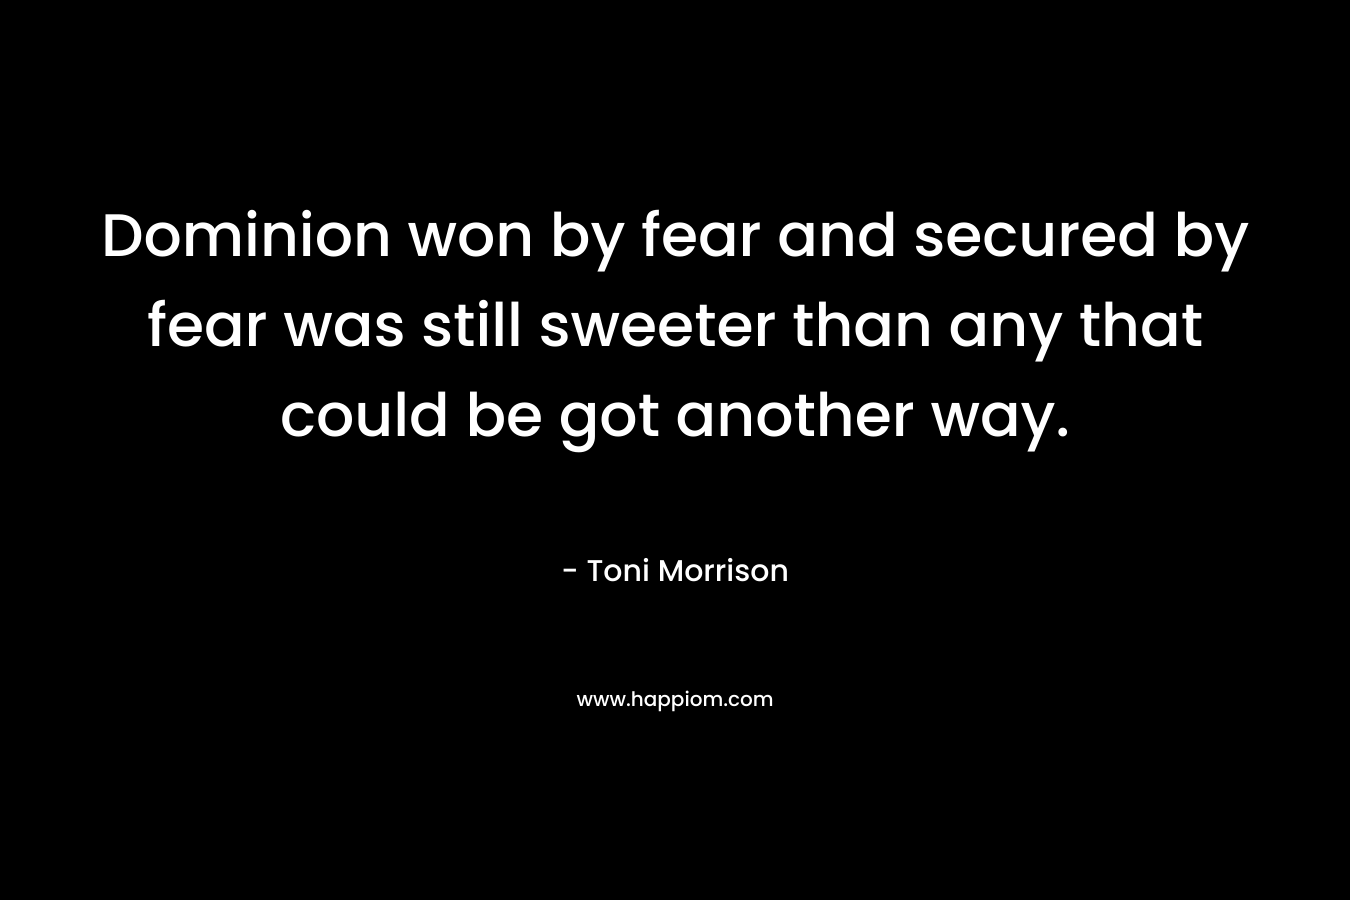 Dominion won by fear and secured by fear was still sweeter than any that could be got another way. – Toni Morrison